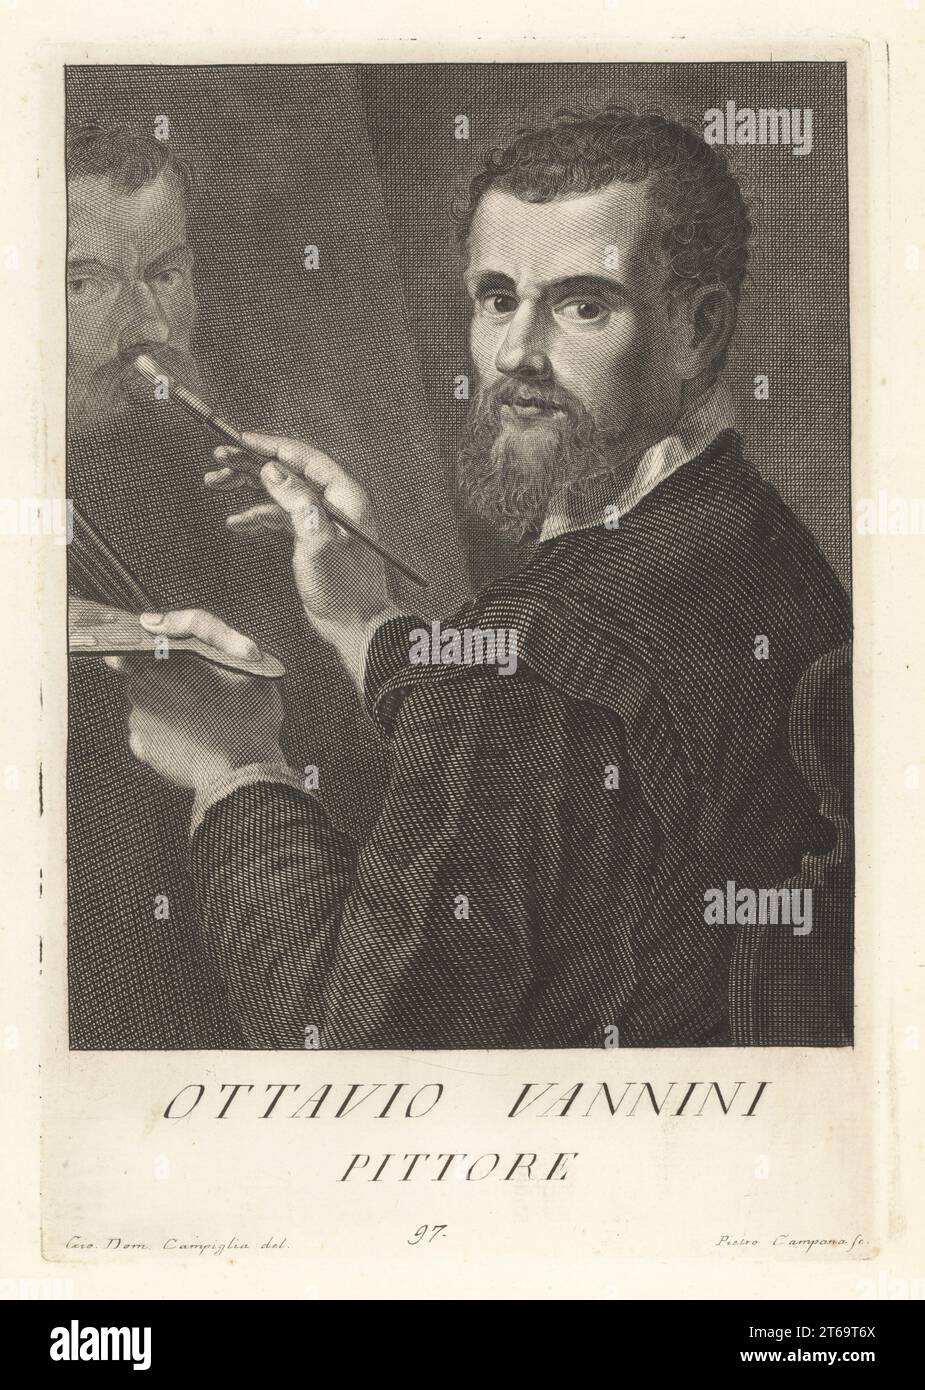 Ottavio Vannini, Italian artist of the Baroque period, 1585-1643. Studied under Giovanni Battista Mercati and Passignano, worked mainly in Florence. Depicted with palette and paint brush before a painting on an easel. Pittore. Copperplate engraving by Pietro Campana after Giovanni Domenico Ferretti after a self portrait by the artist from Francesco Moucke's Museo Florentino (Museum Florentinum), Serie di Ritratti de Pittori (Series of Portraits of Painters) stamperia Mouckiana, Florence, 1752-62. Stock Photo